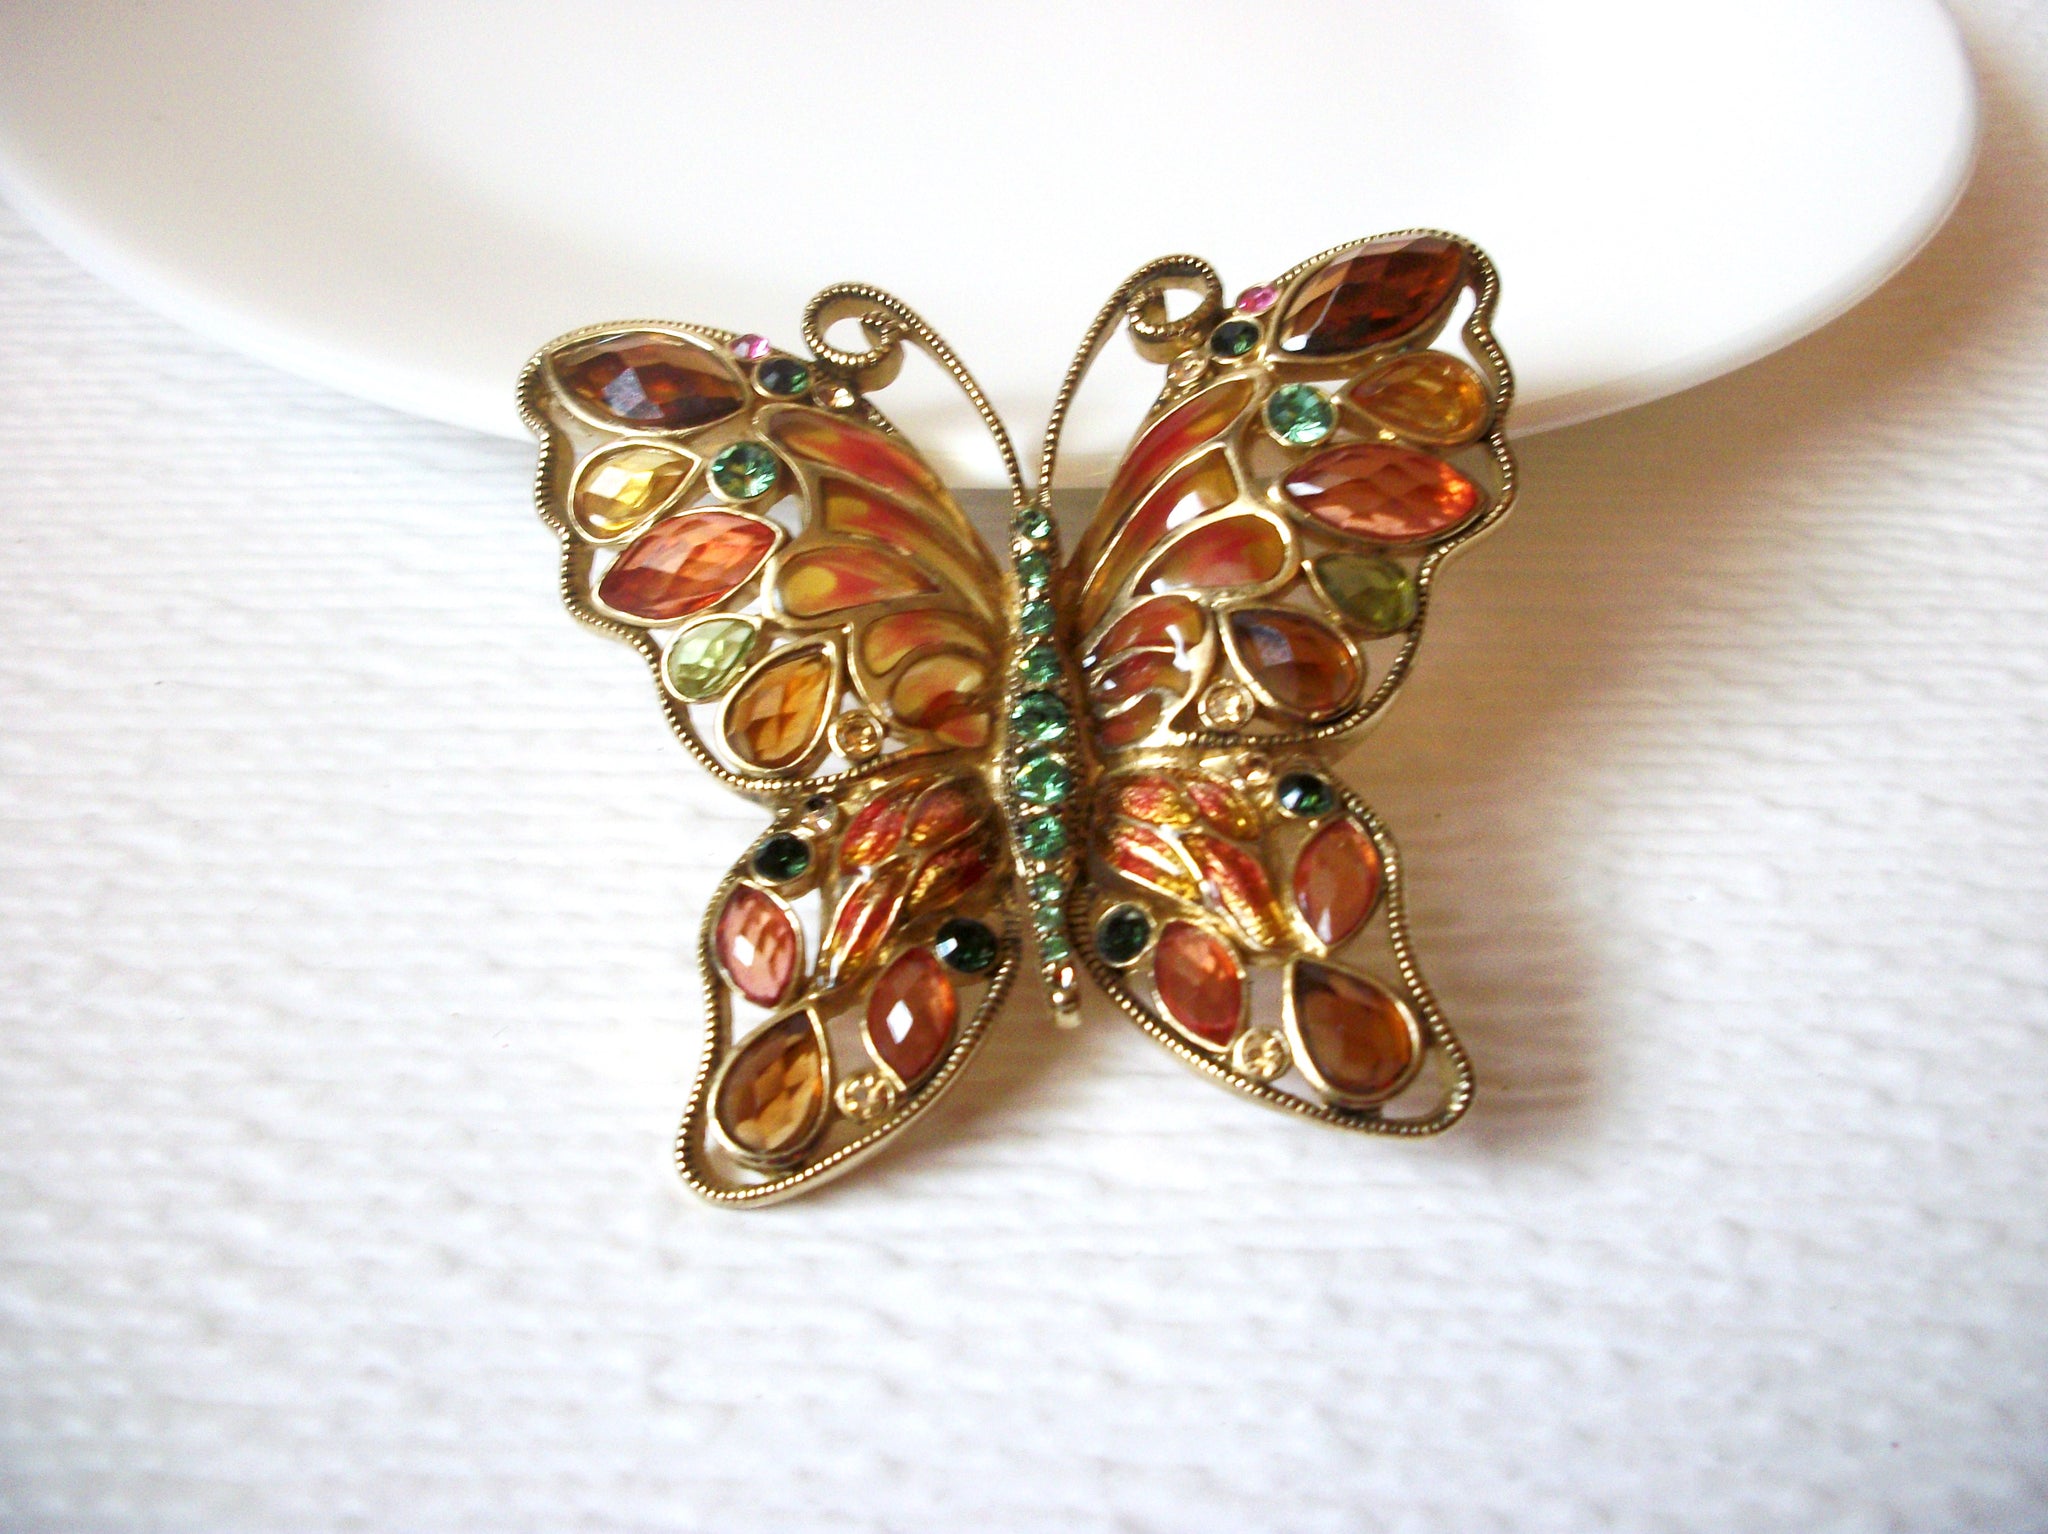 Larger Vintage MONET Butterfly Brooch Pin 121620